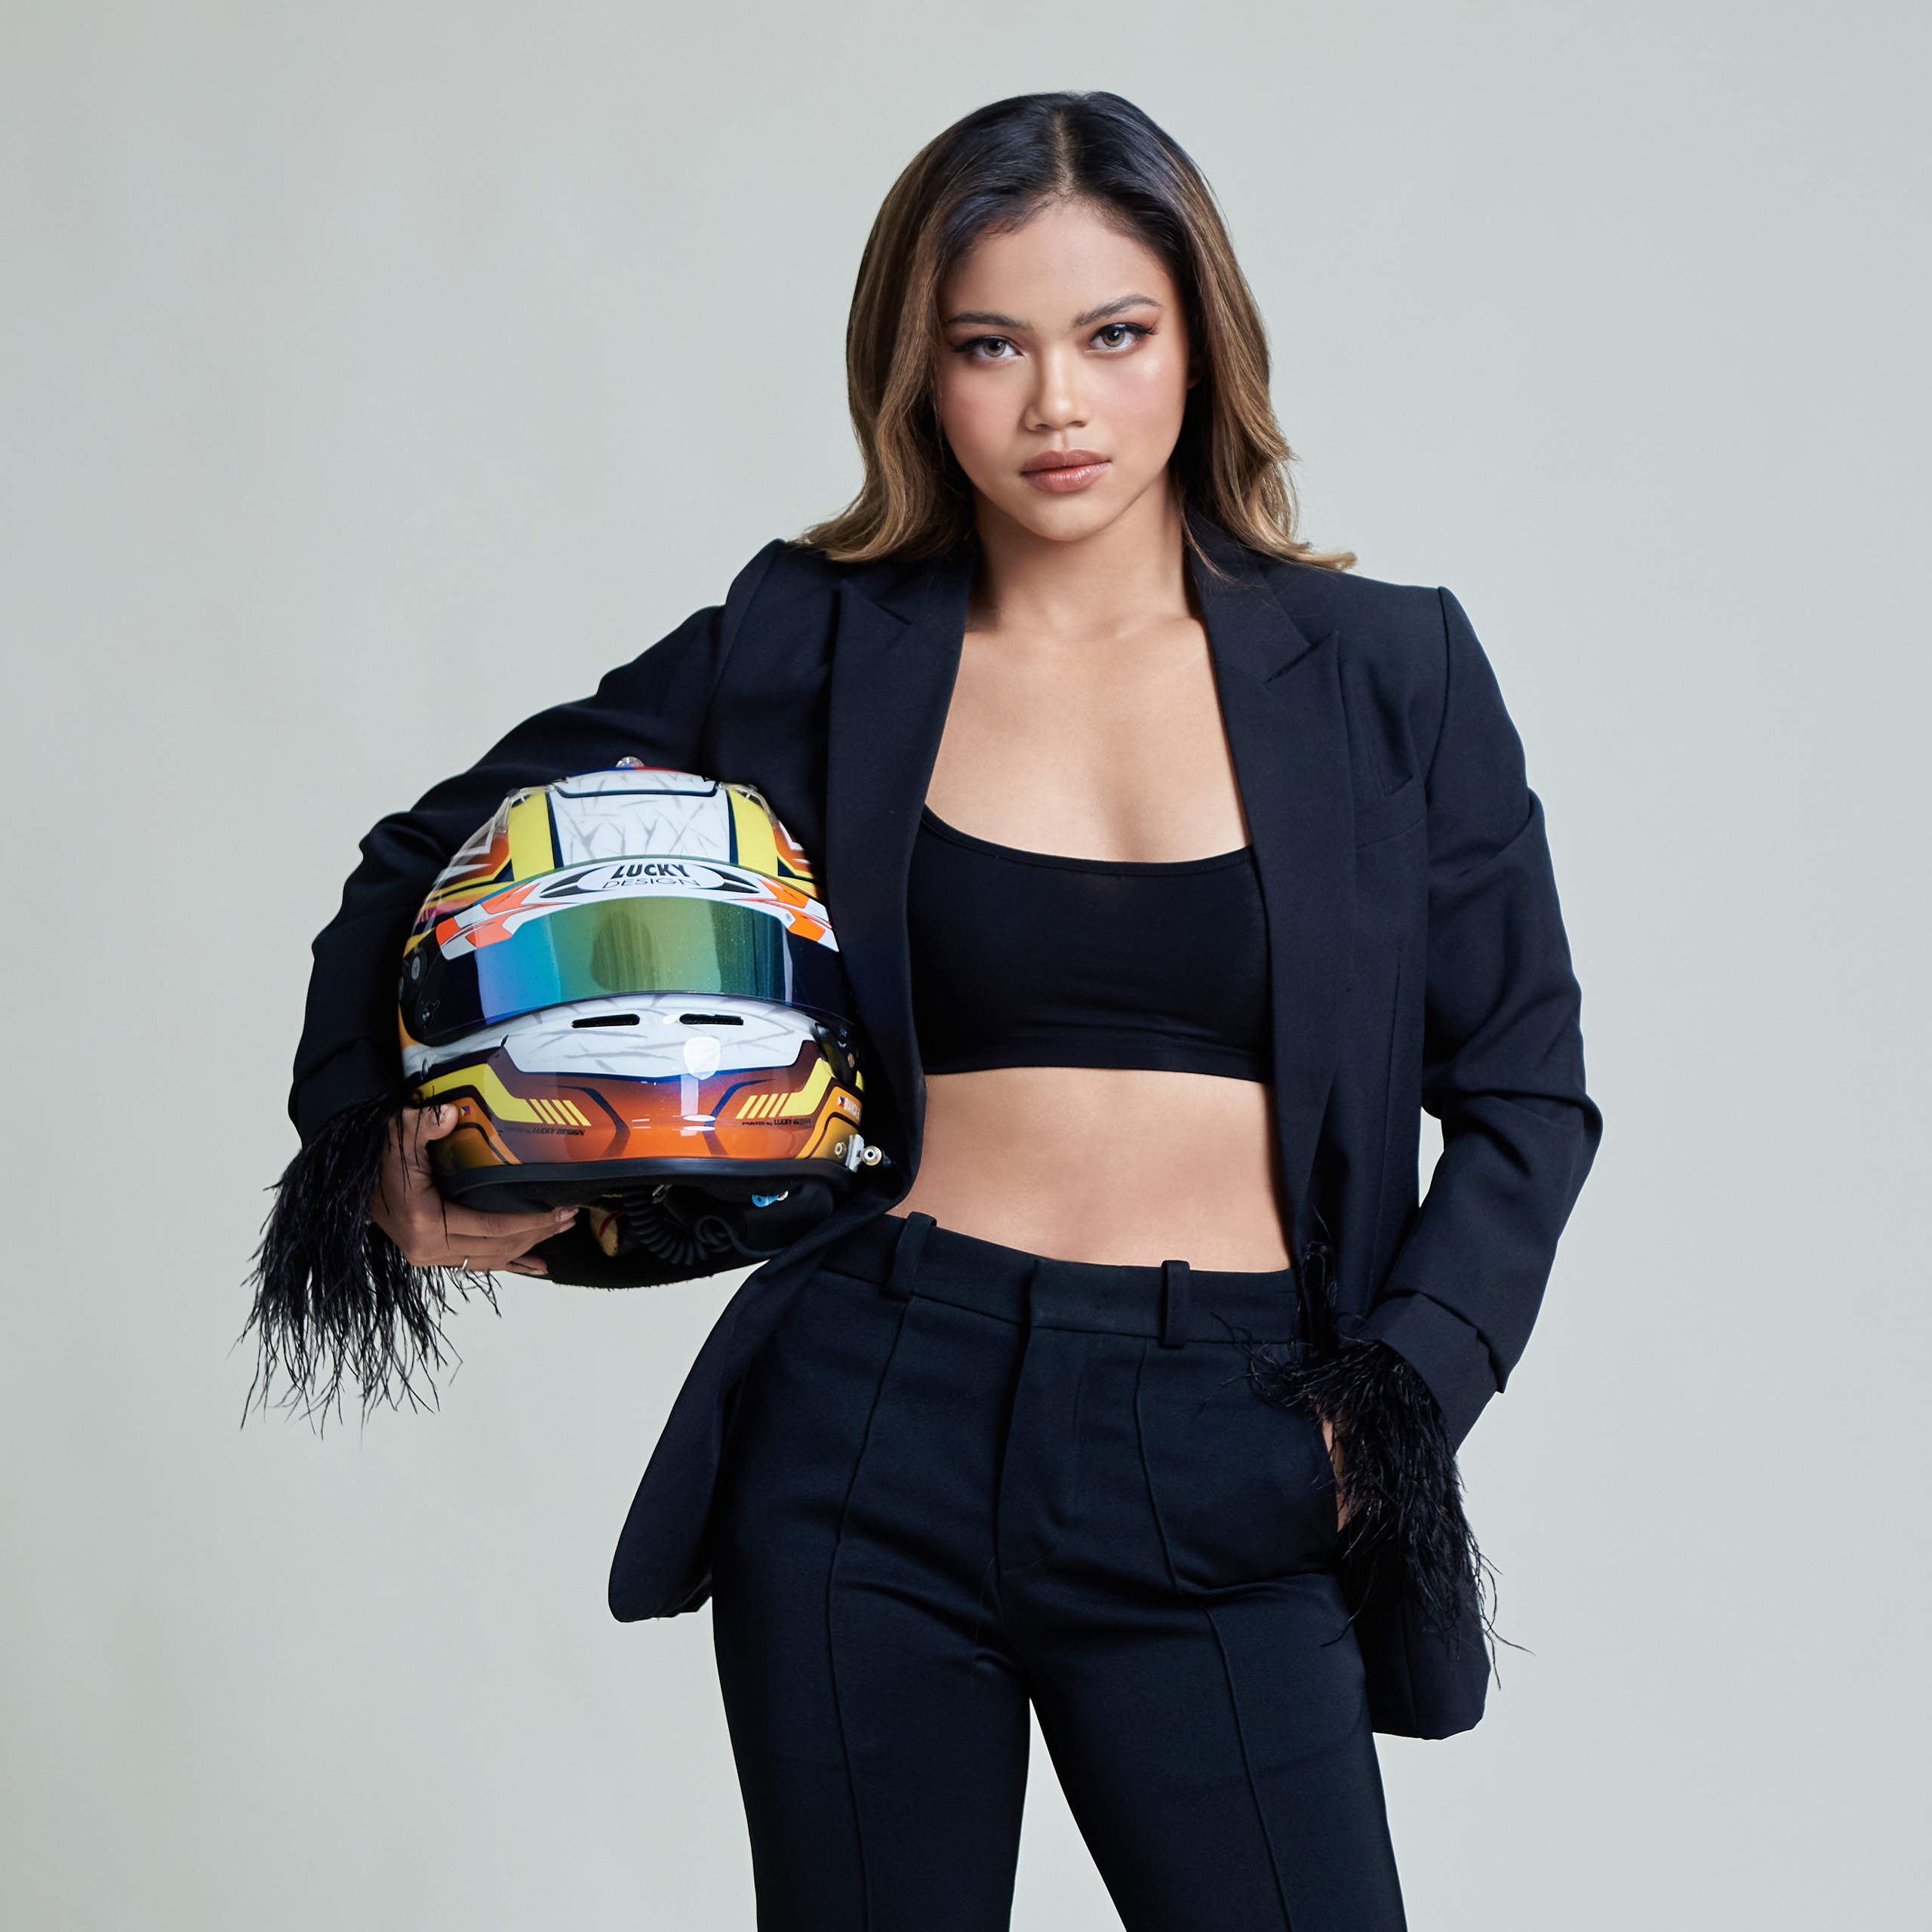 How to Cop Bianca Bustamante’s Racer Style On and Off the Tracks